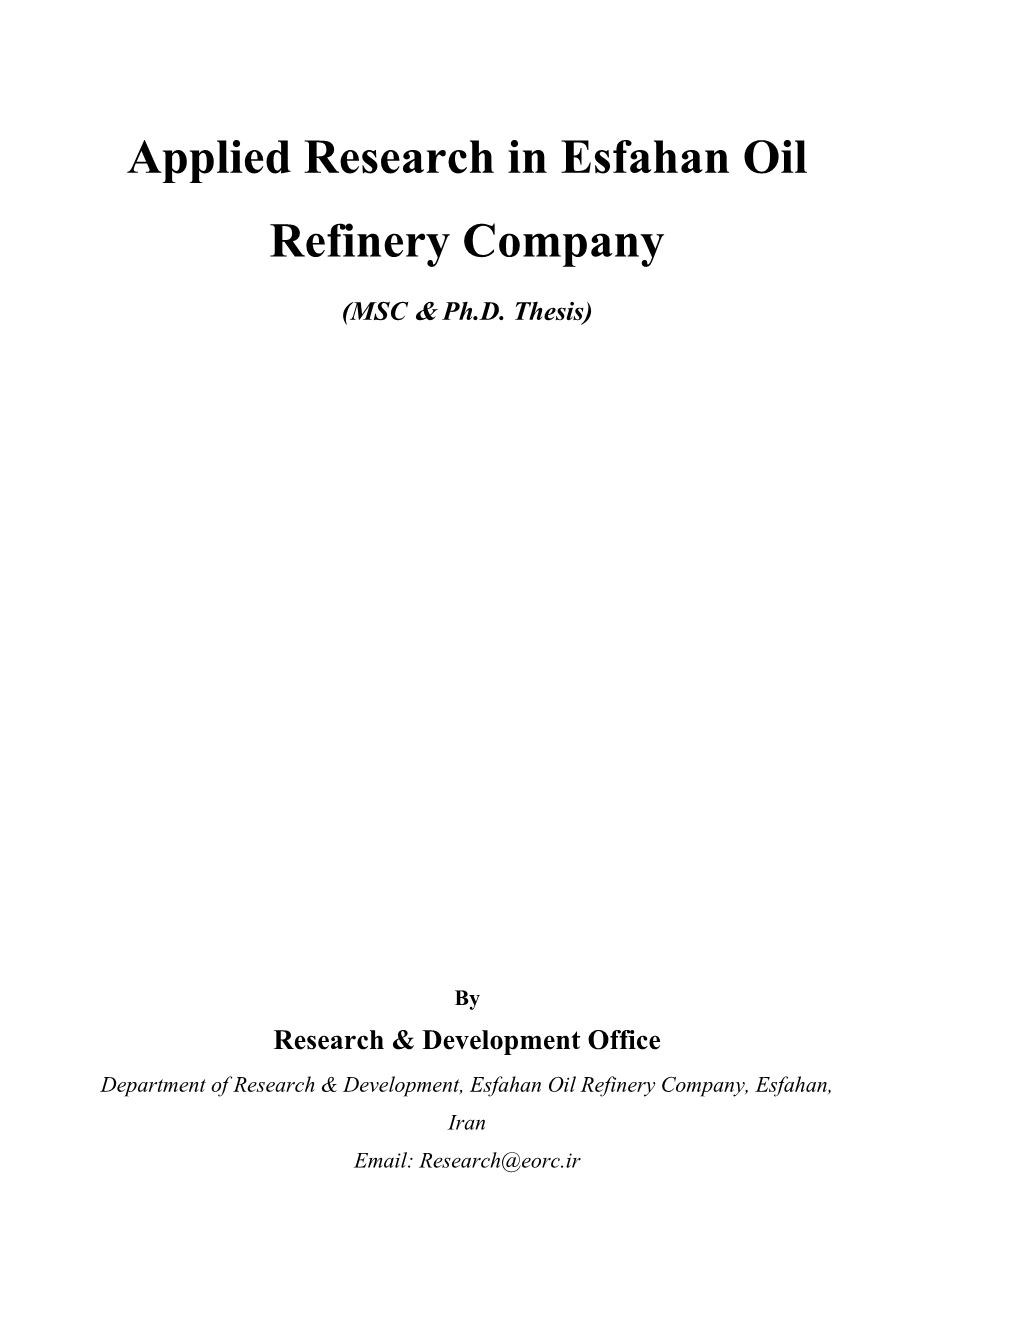 Applied Research in Esfahan Oil Refinery Company